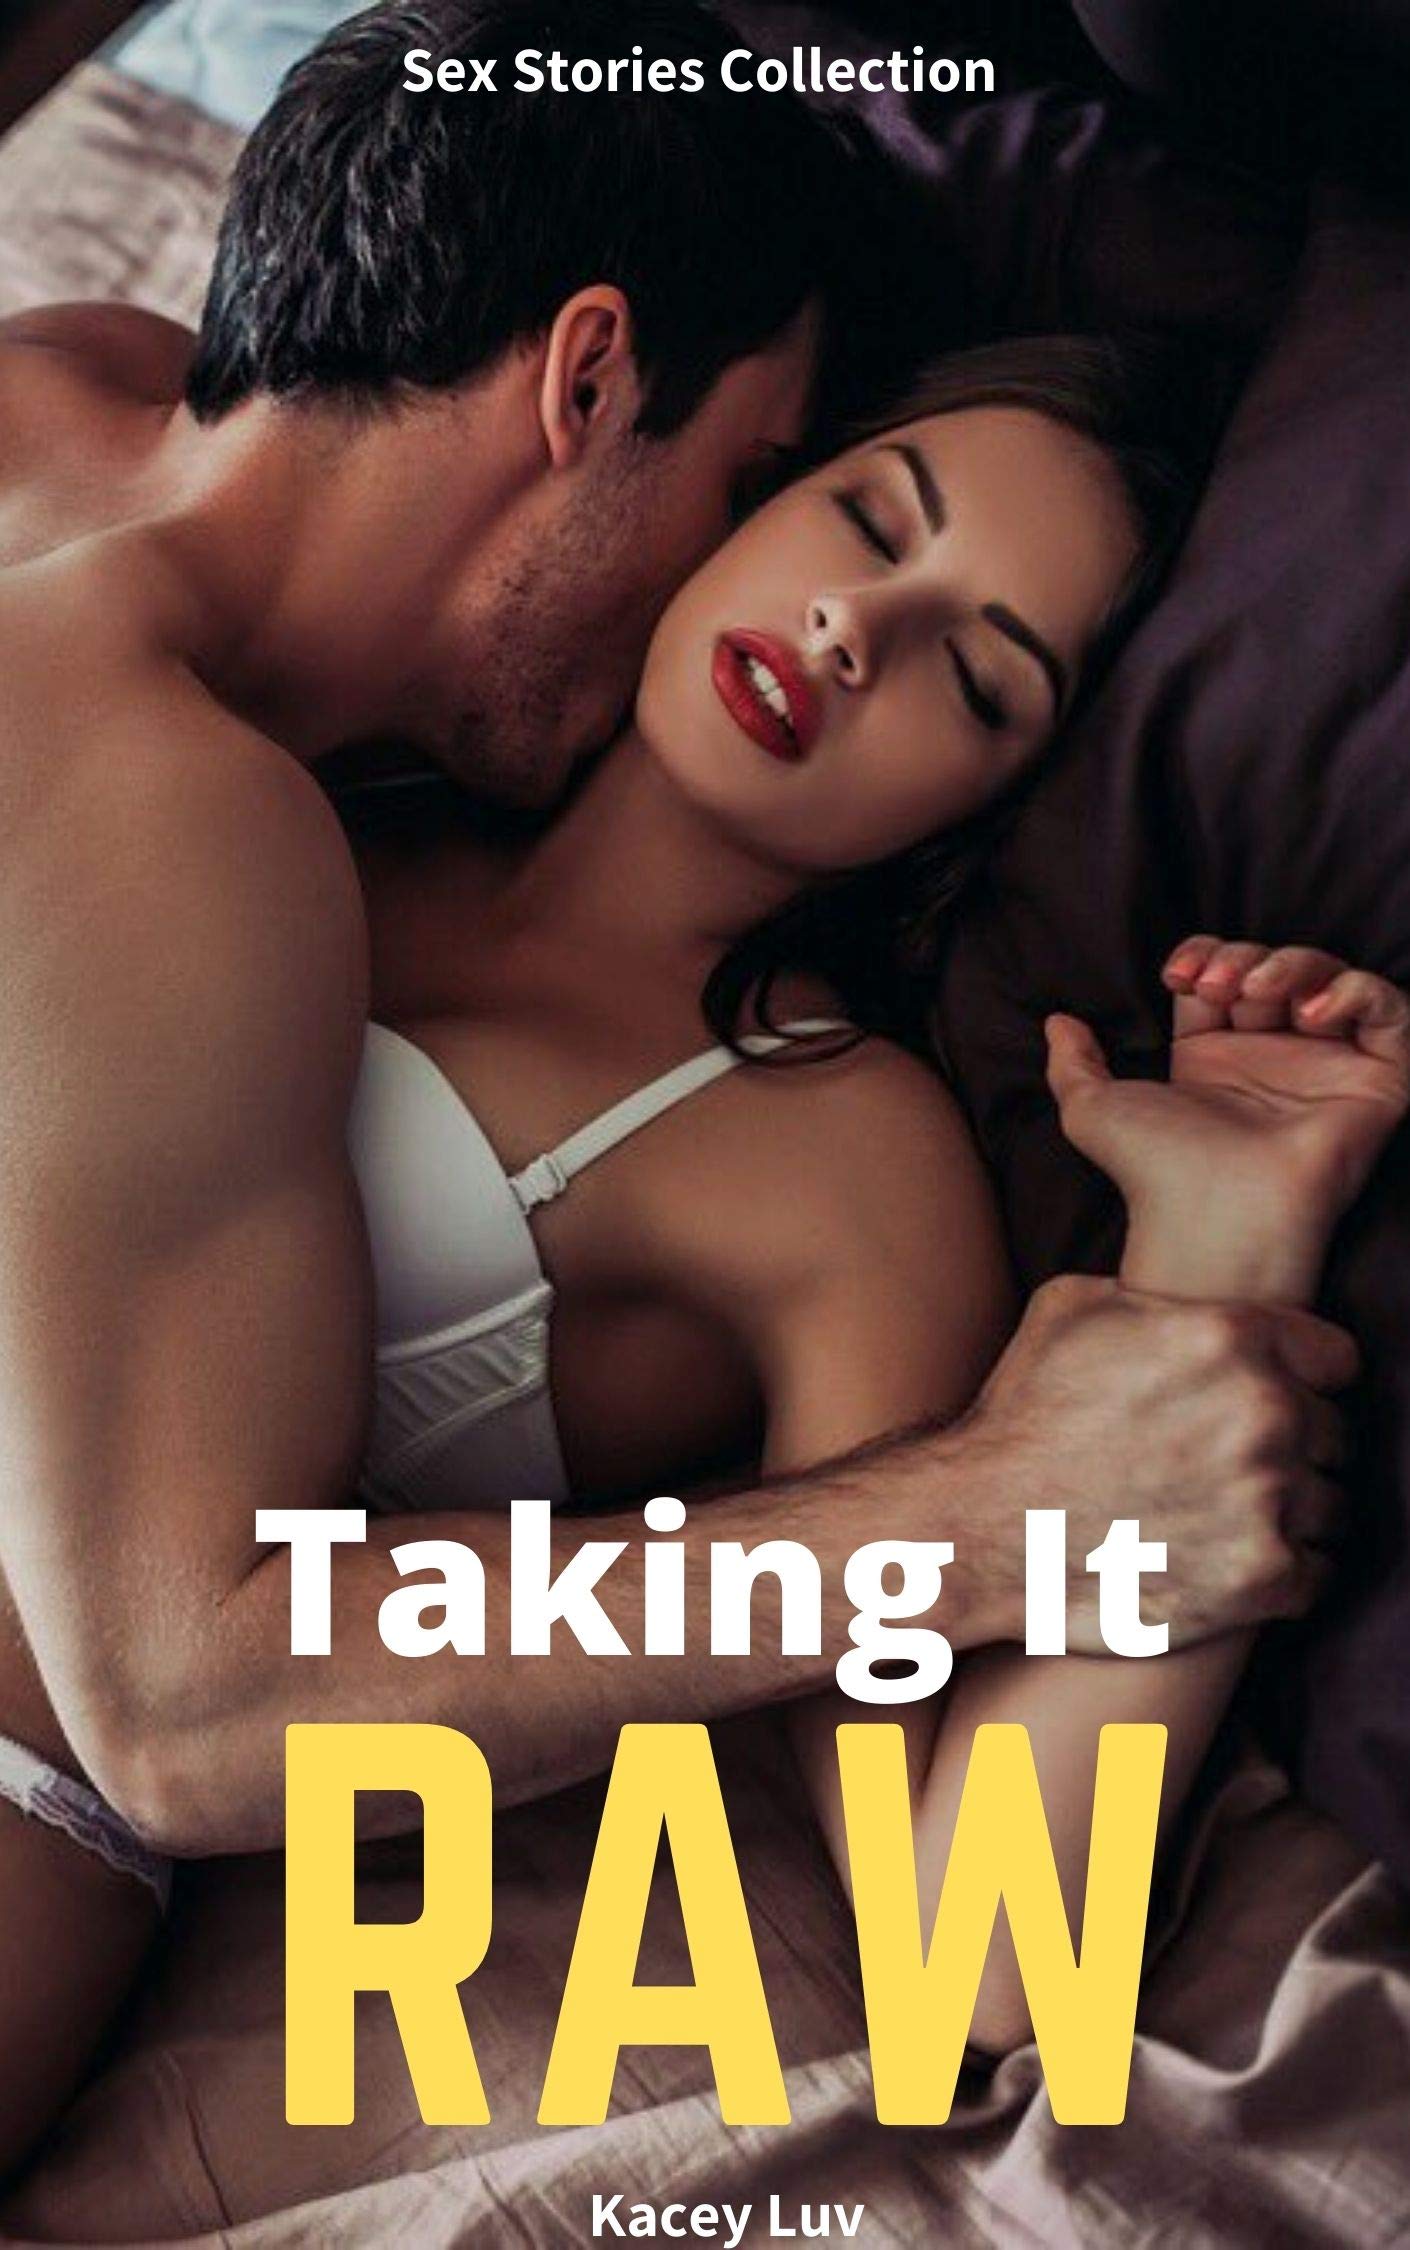 deb richards recommends sex in the raw pic